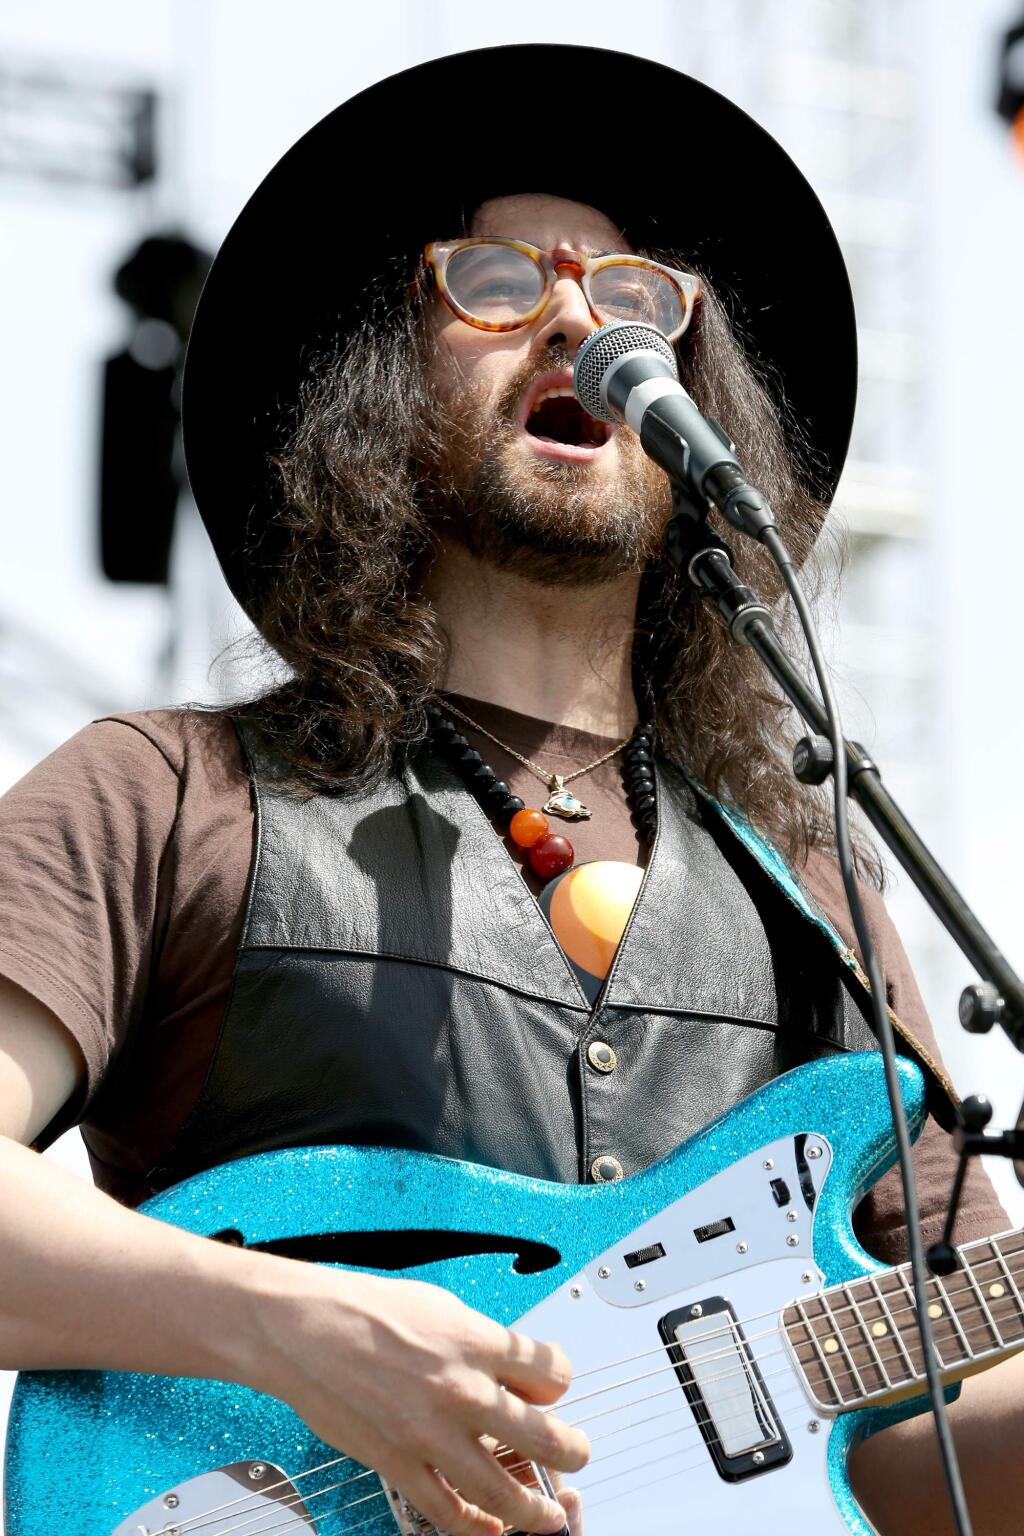 Sean Lennon of The Ghost Of A Saber Tooth Tiger performs at the 2015 Coachella Music and Arts Festival on Friday, April 10, 2015, in Indio, Calif. (Photo by Rich Fury/Invision/AP)